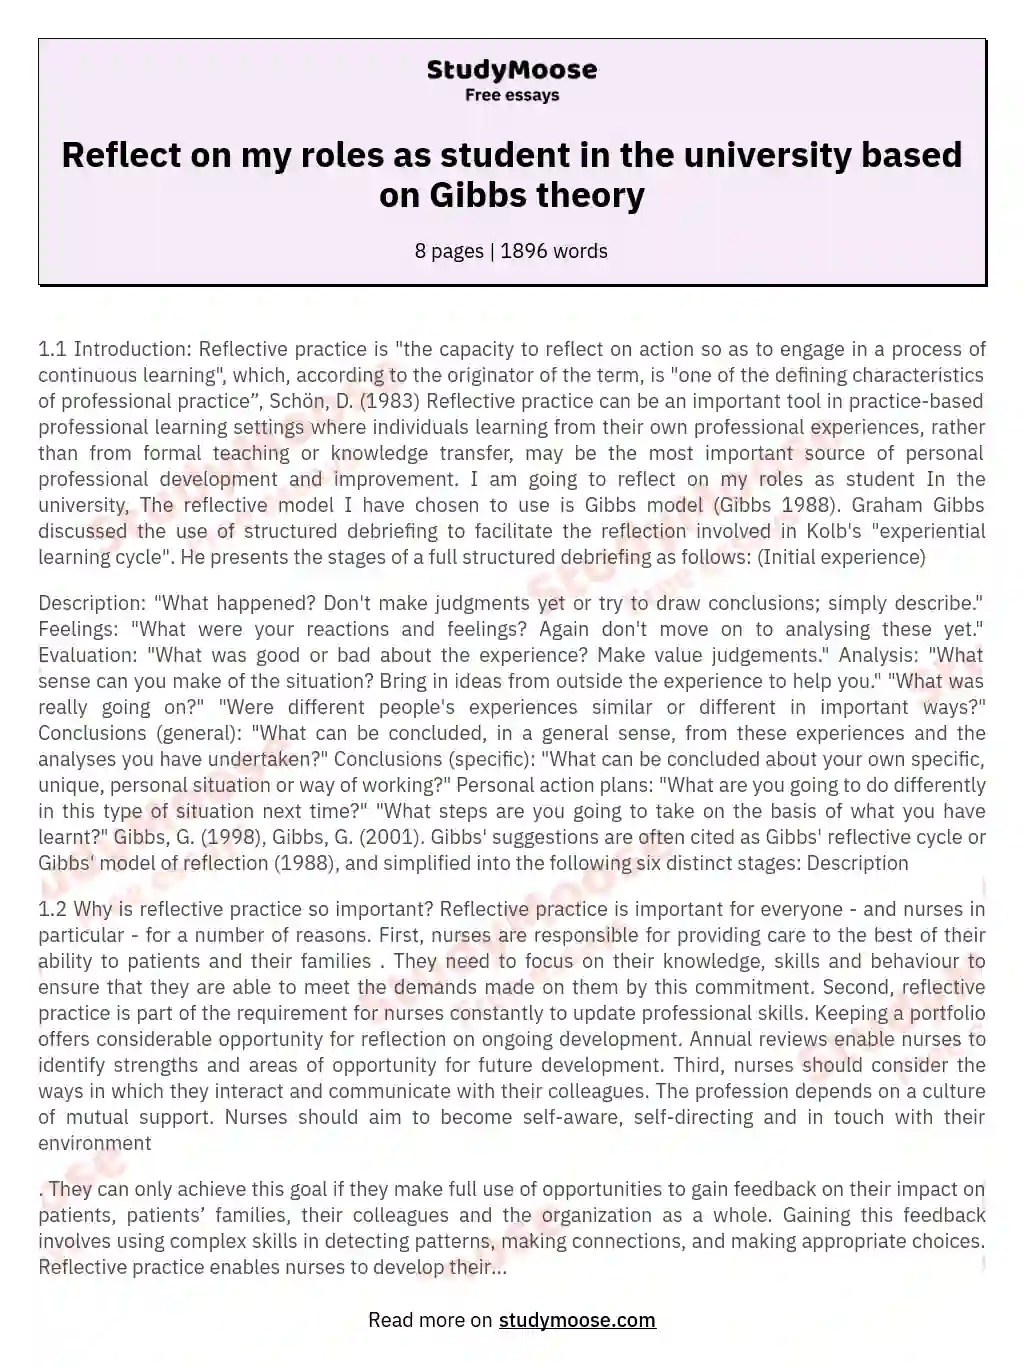 Reflect on my roles as student in the university based on Gibbs theory essay